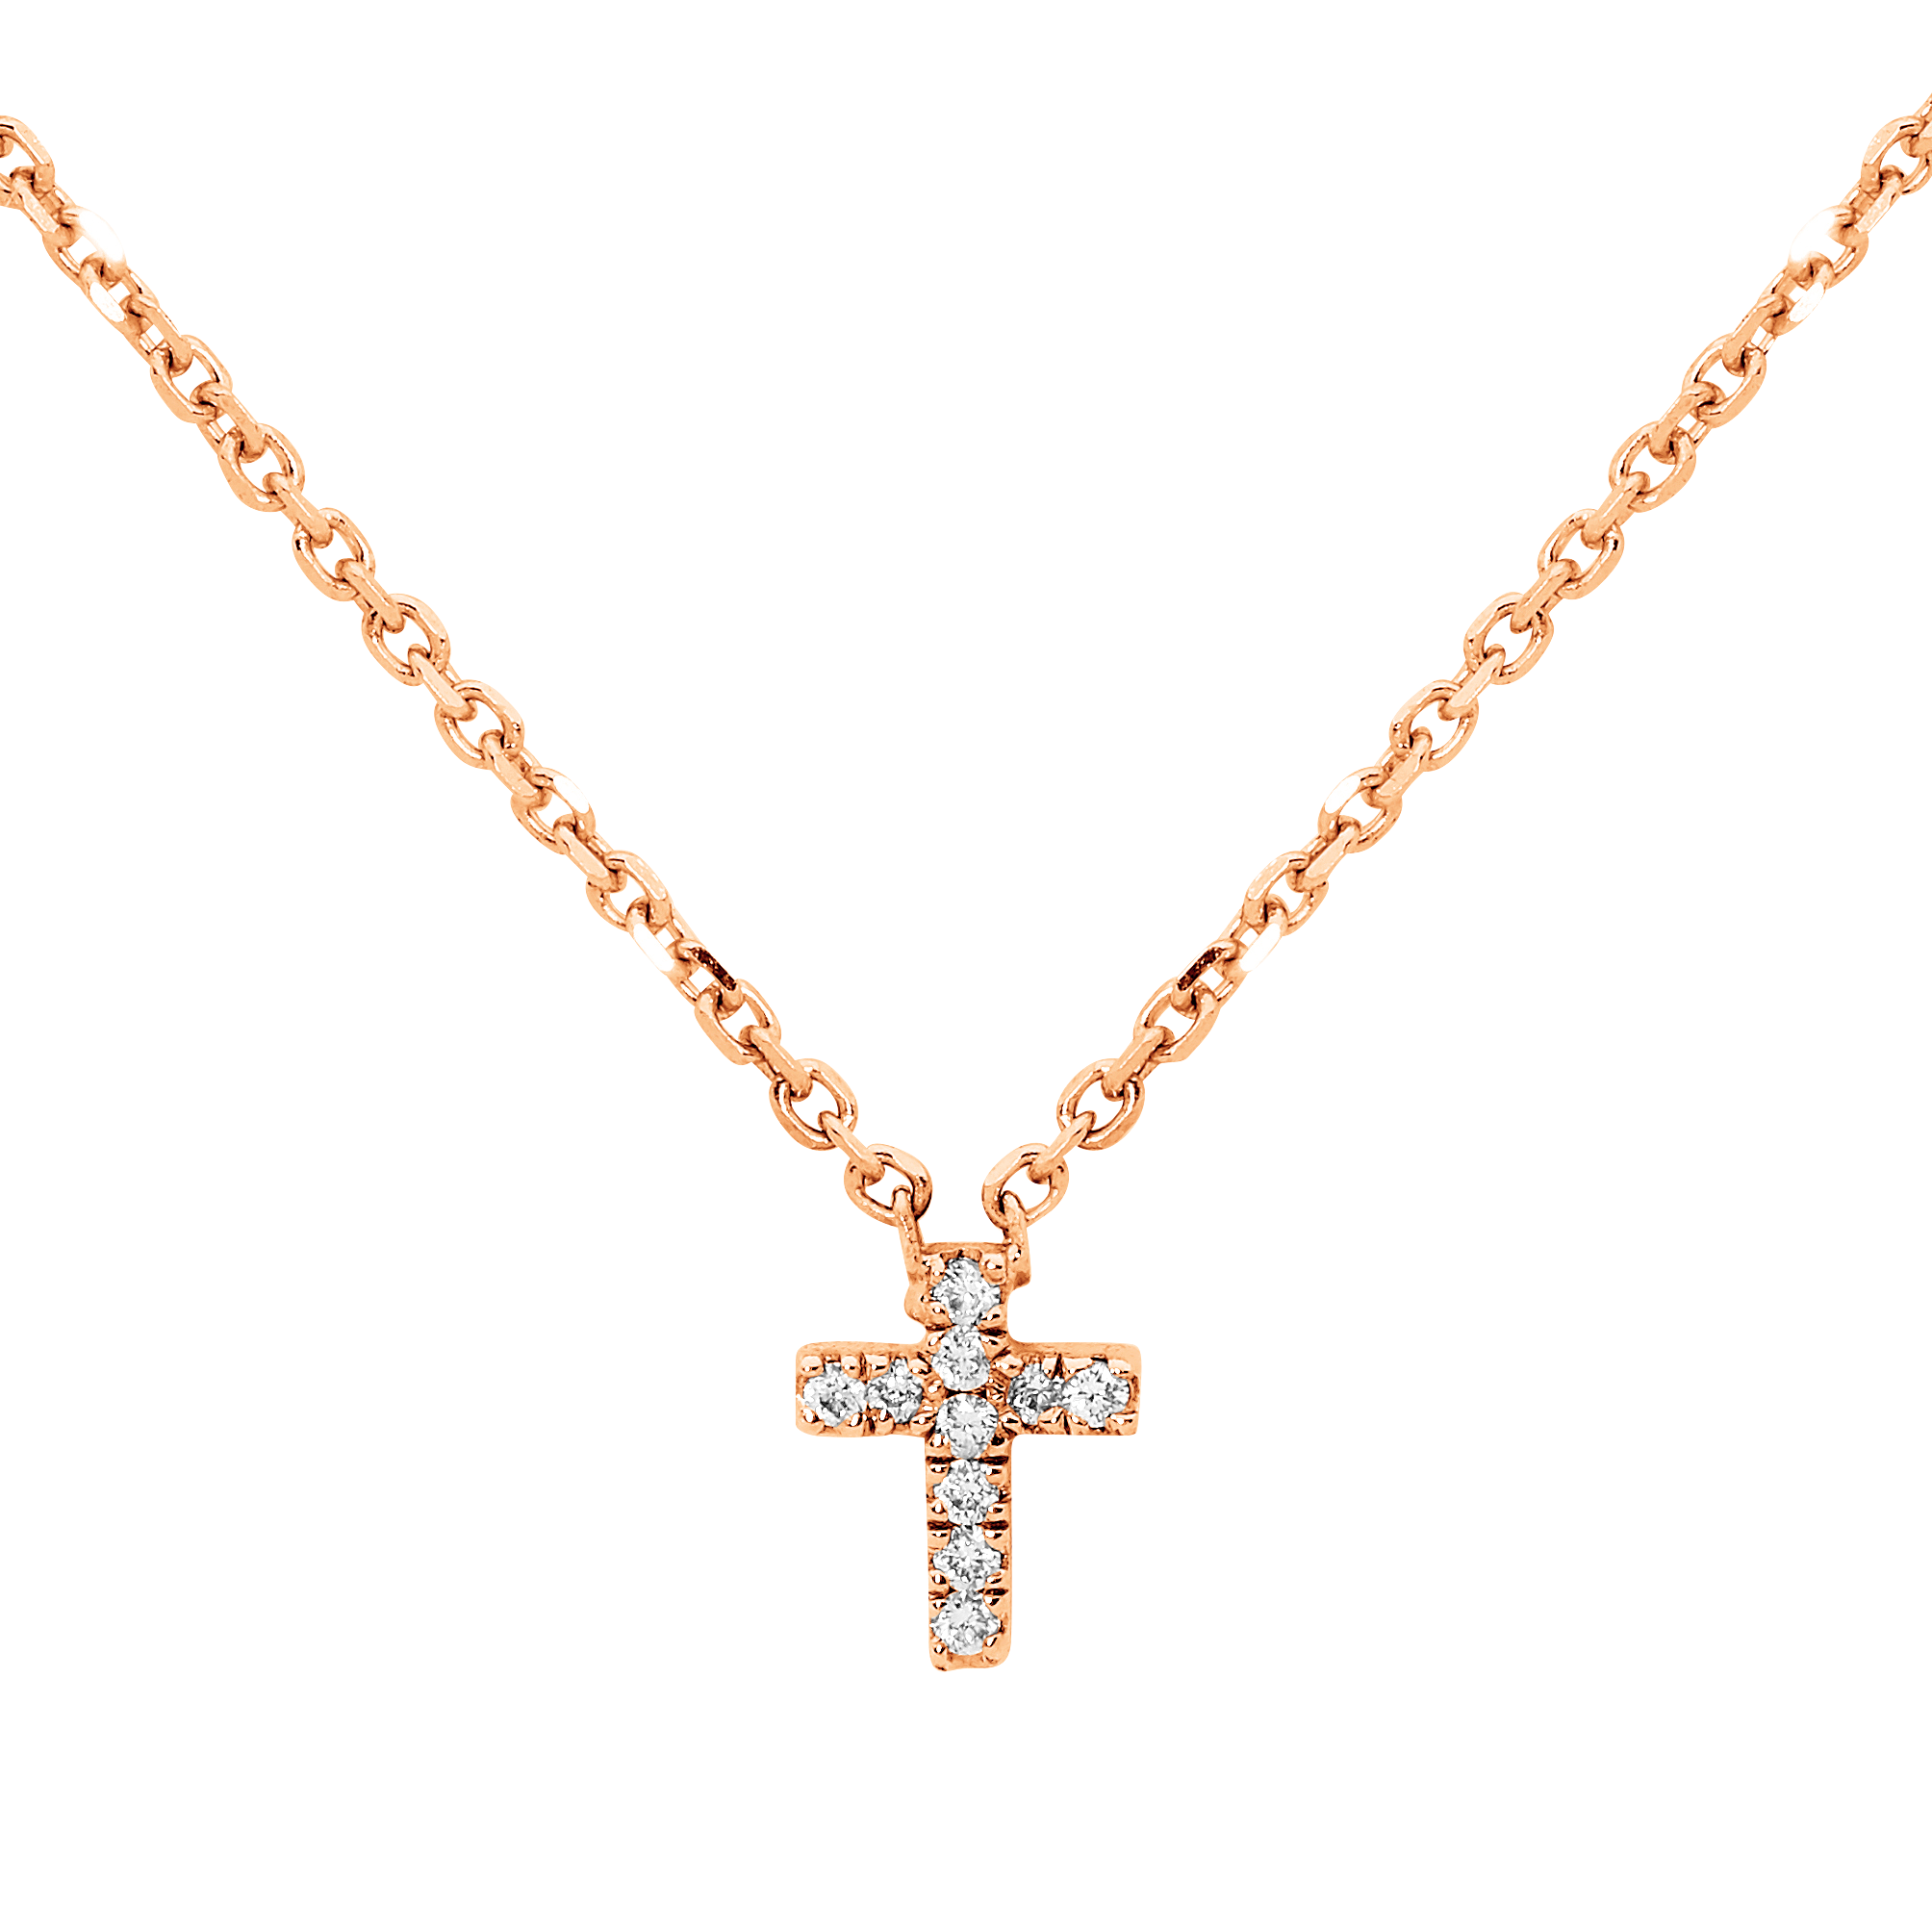 Mini Diamond Cross Necklace - 18k Gold Pendent with Adjustable ...